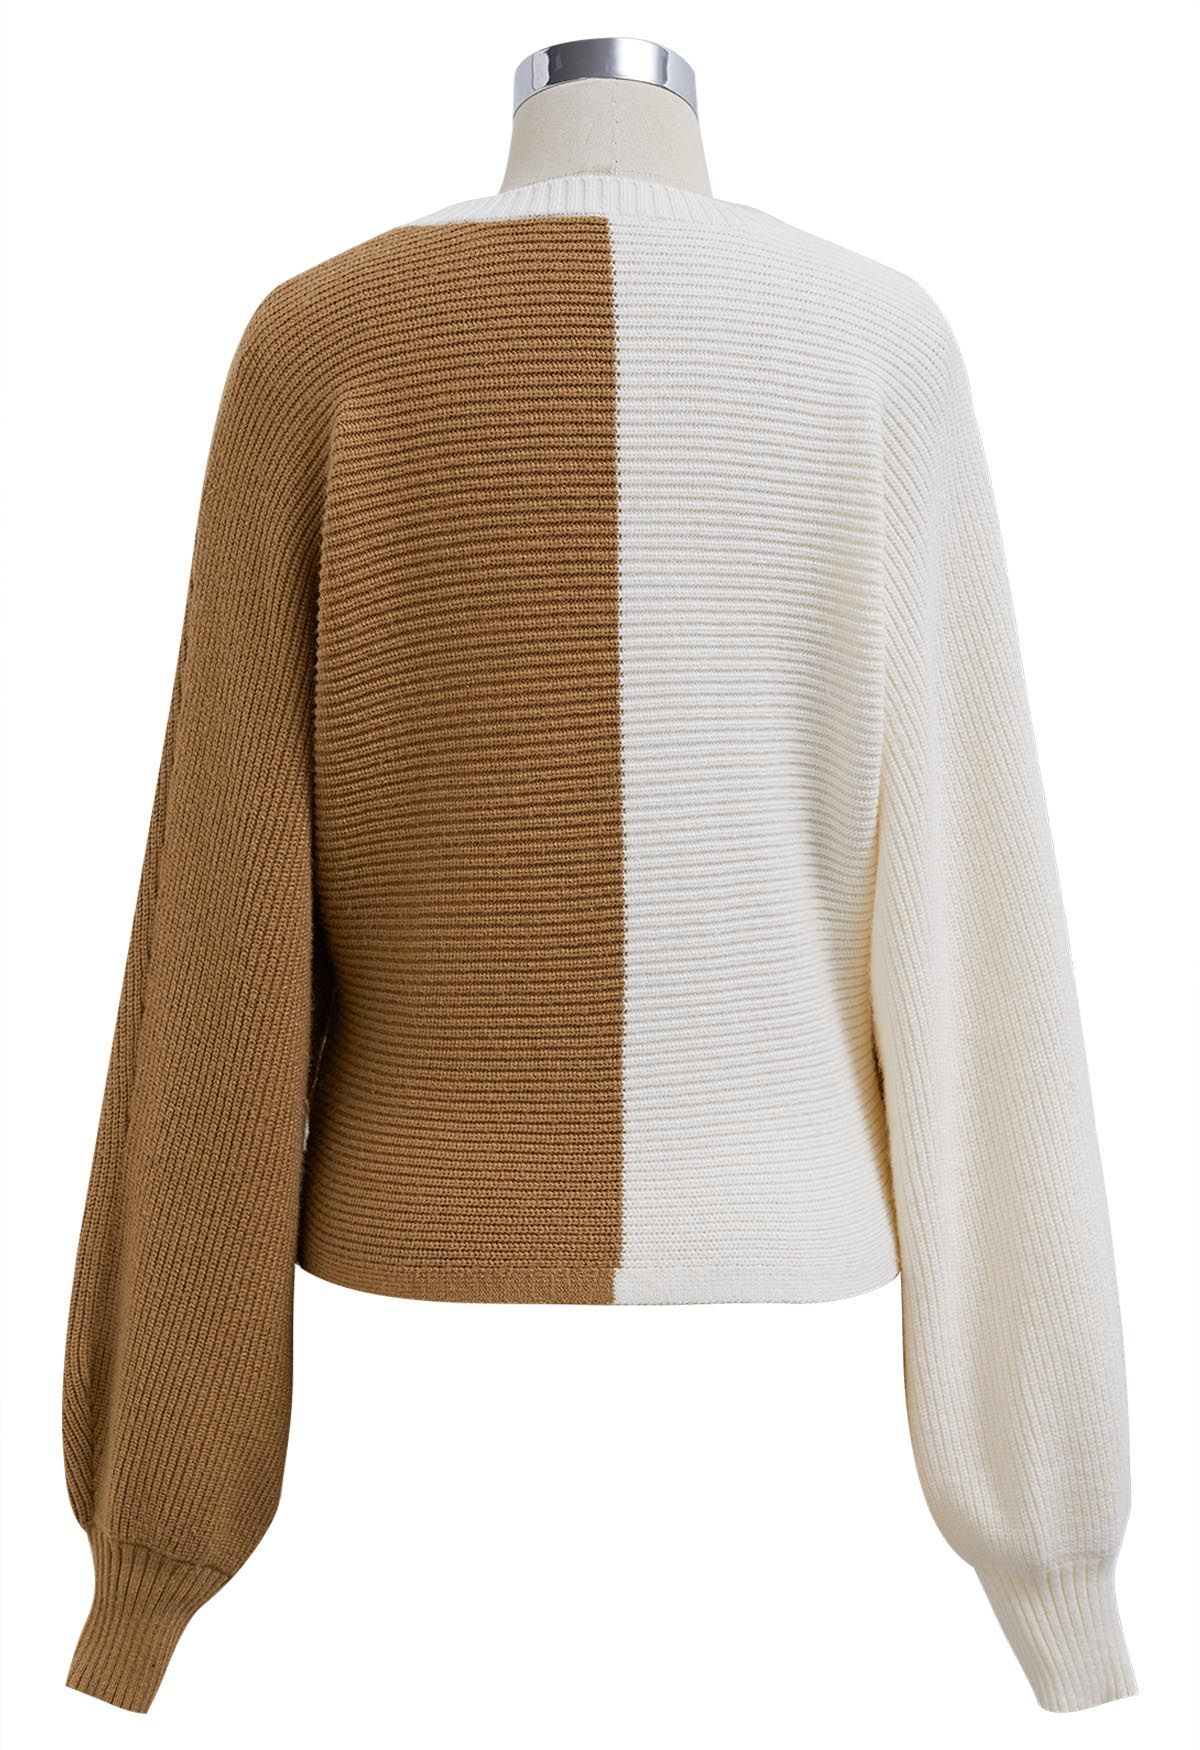 Two-Tone Cross Hem Knit Sweater - Retro, Indie and Unique Fashion